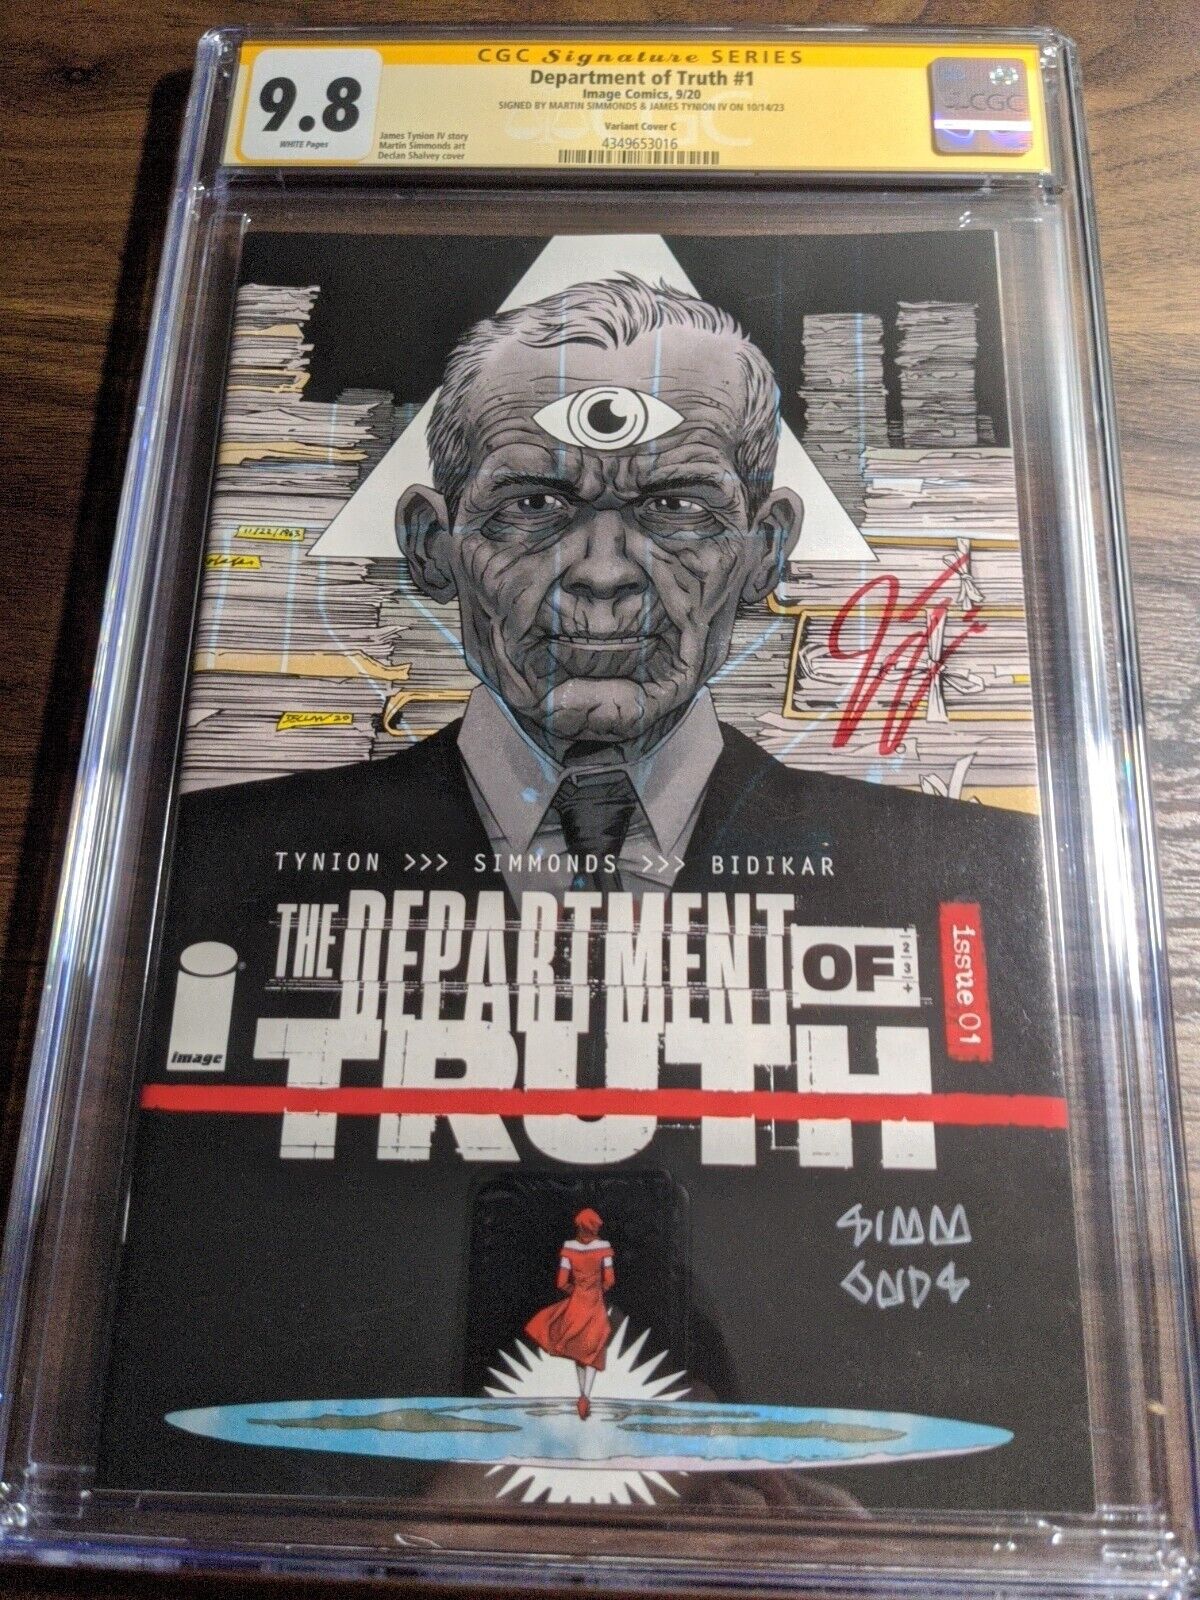 DEPARTMENT OF TRUTH #1 CGC 9.8 (Variant C) Double signed Tynion & Simmonds